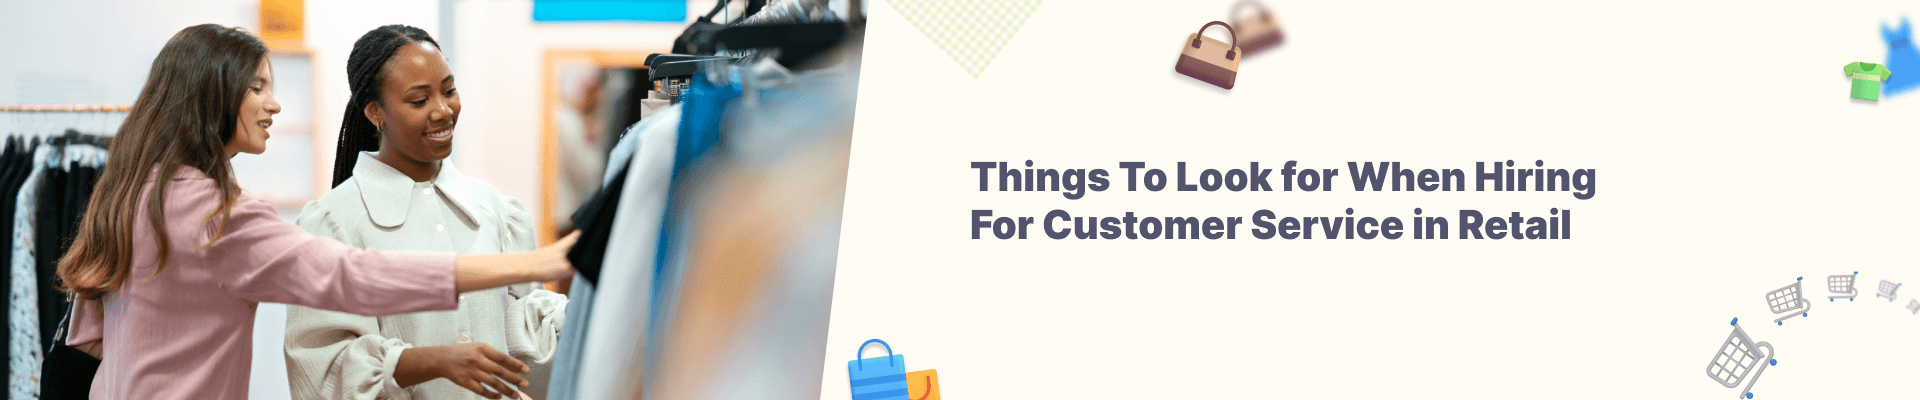 Things To Look for When Hiring For Customer Service in Retail